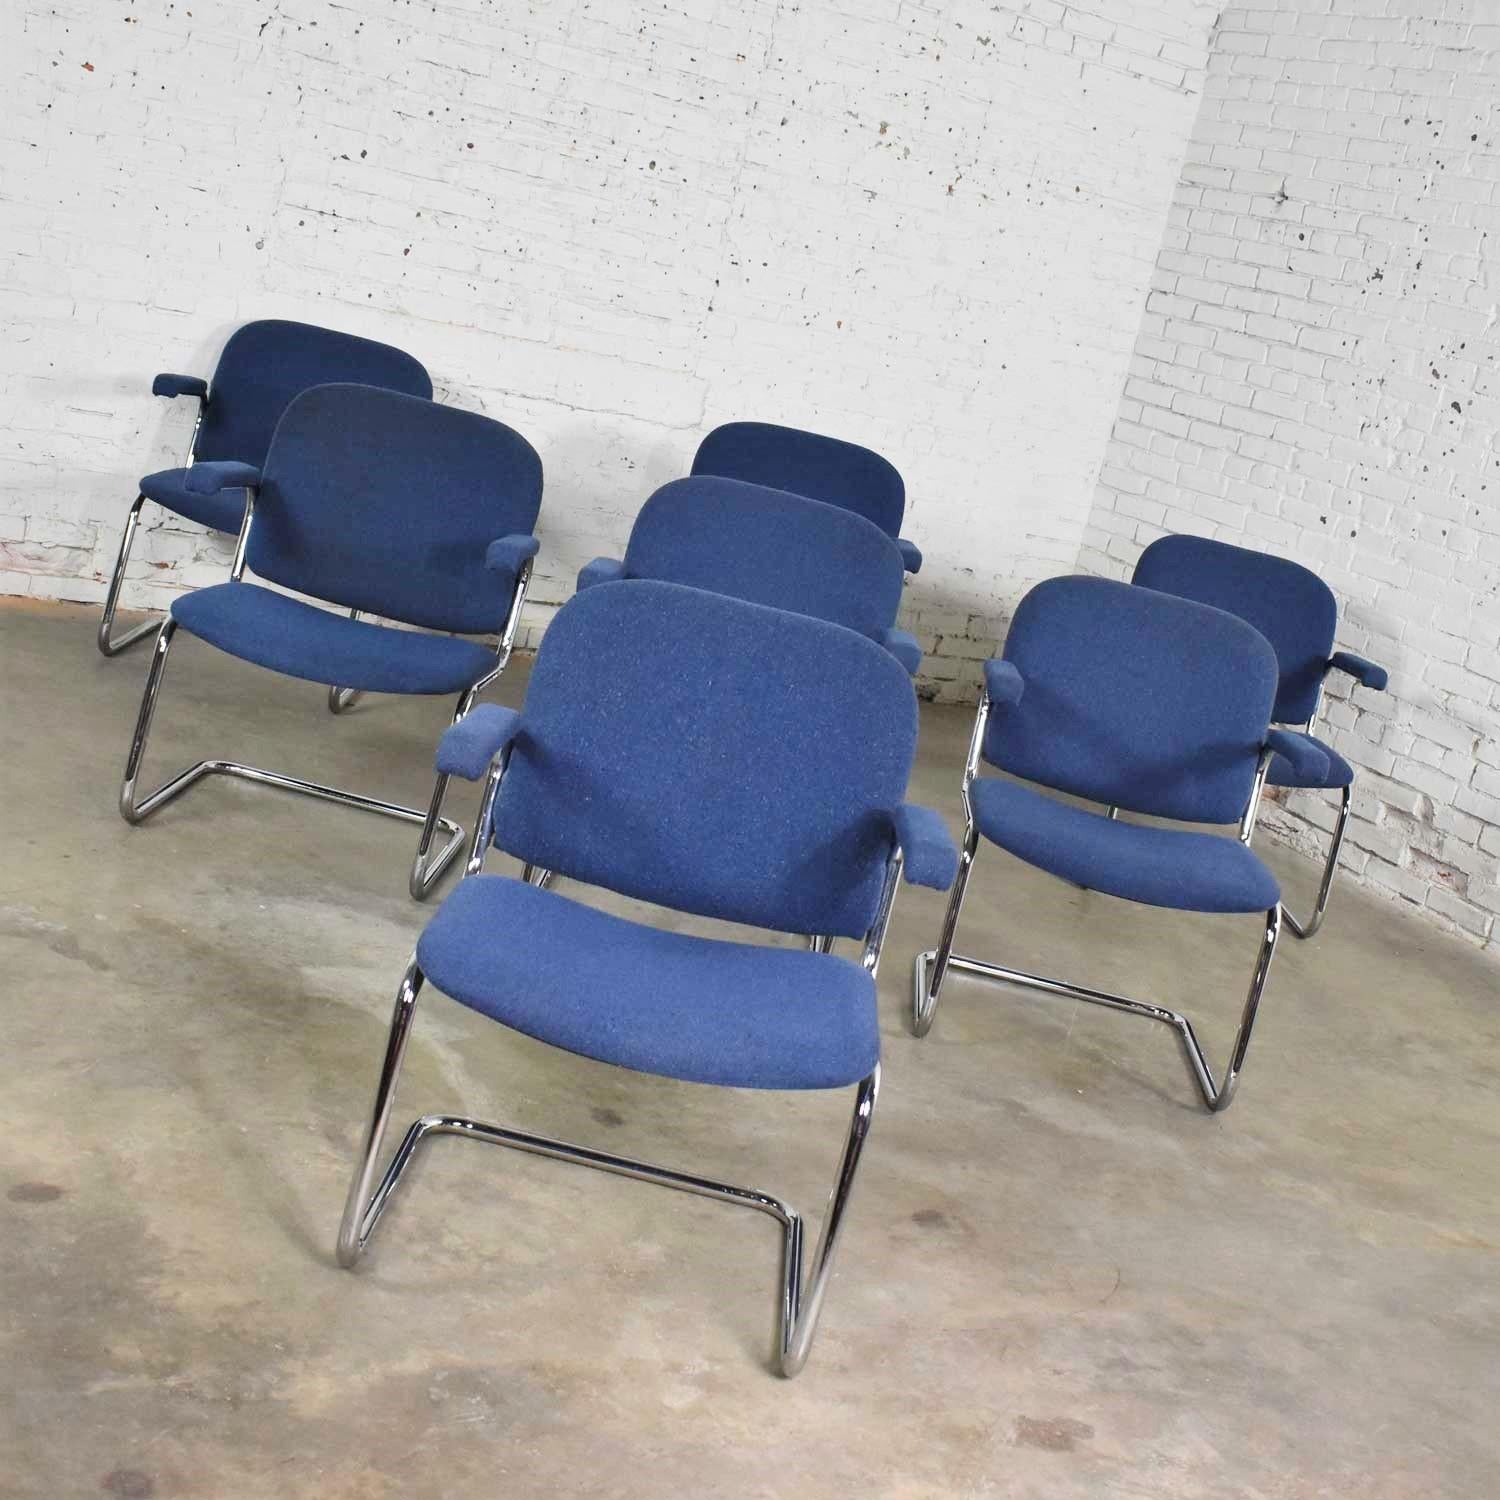 20th Century Tubular Chrome and Blue Fabric Cantilever Lounge Chair with Arms Set of 7 For Sale